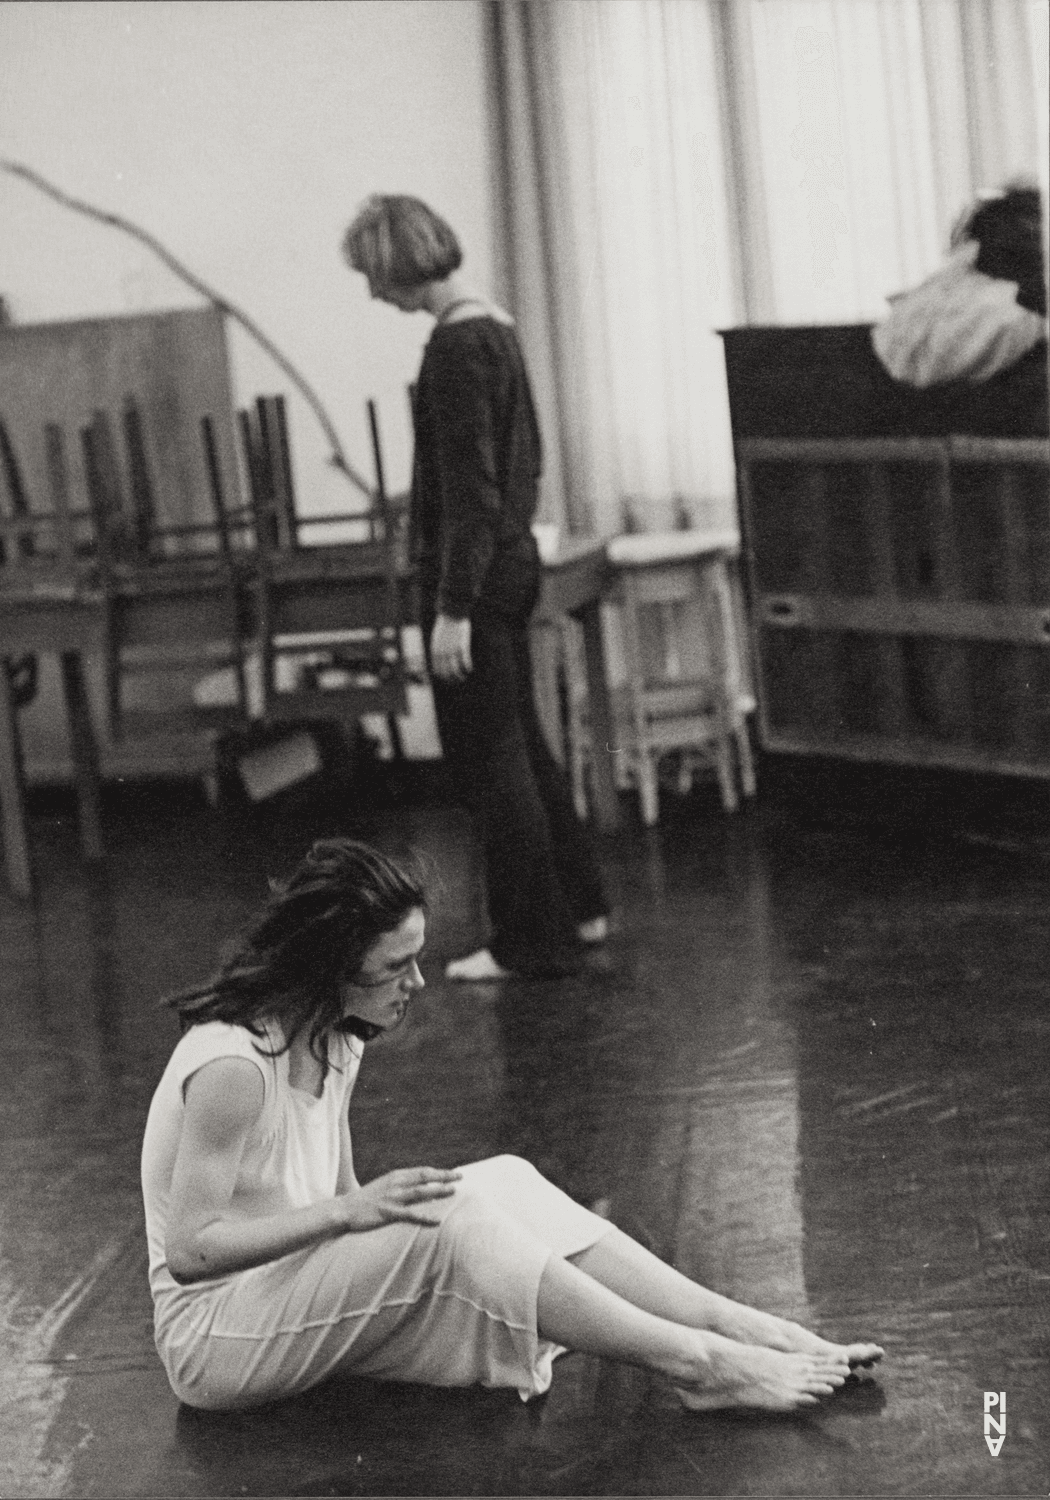 Malou Airaudo and Dominique Mercy in “Café Müller” by Pina Bausch